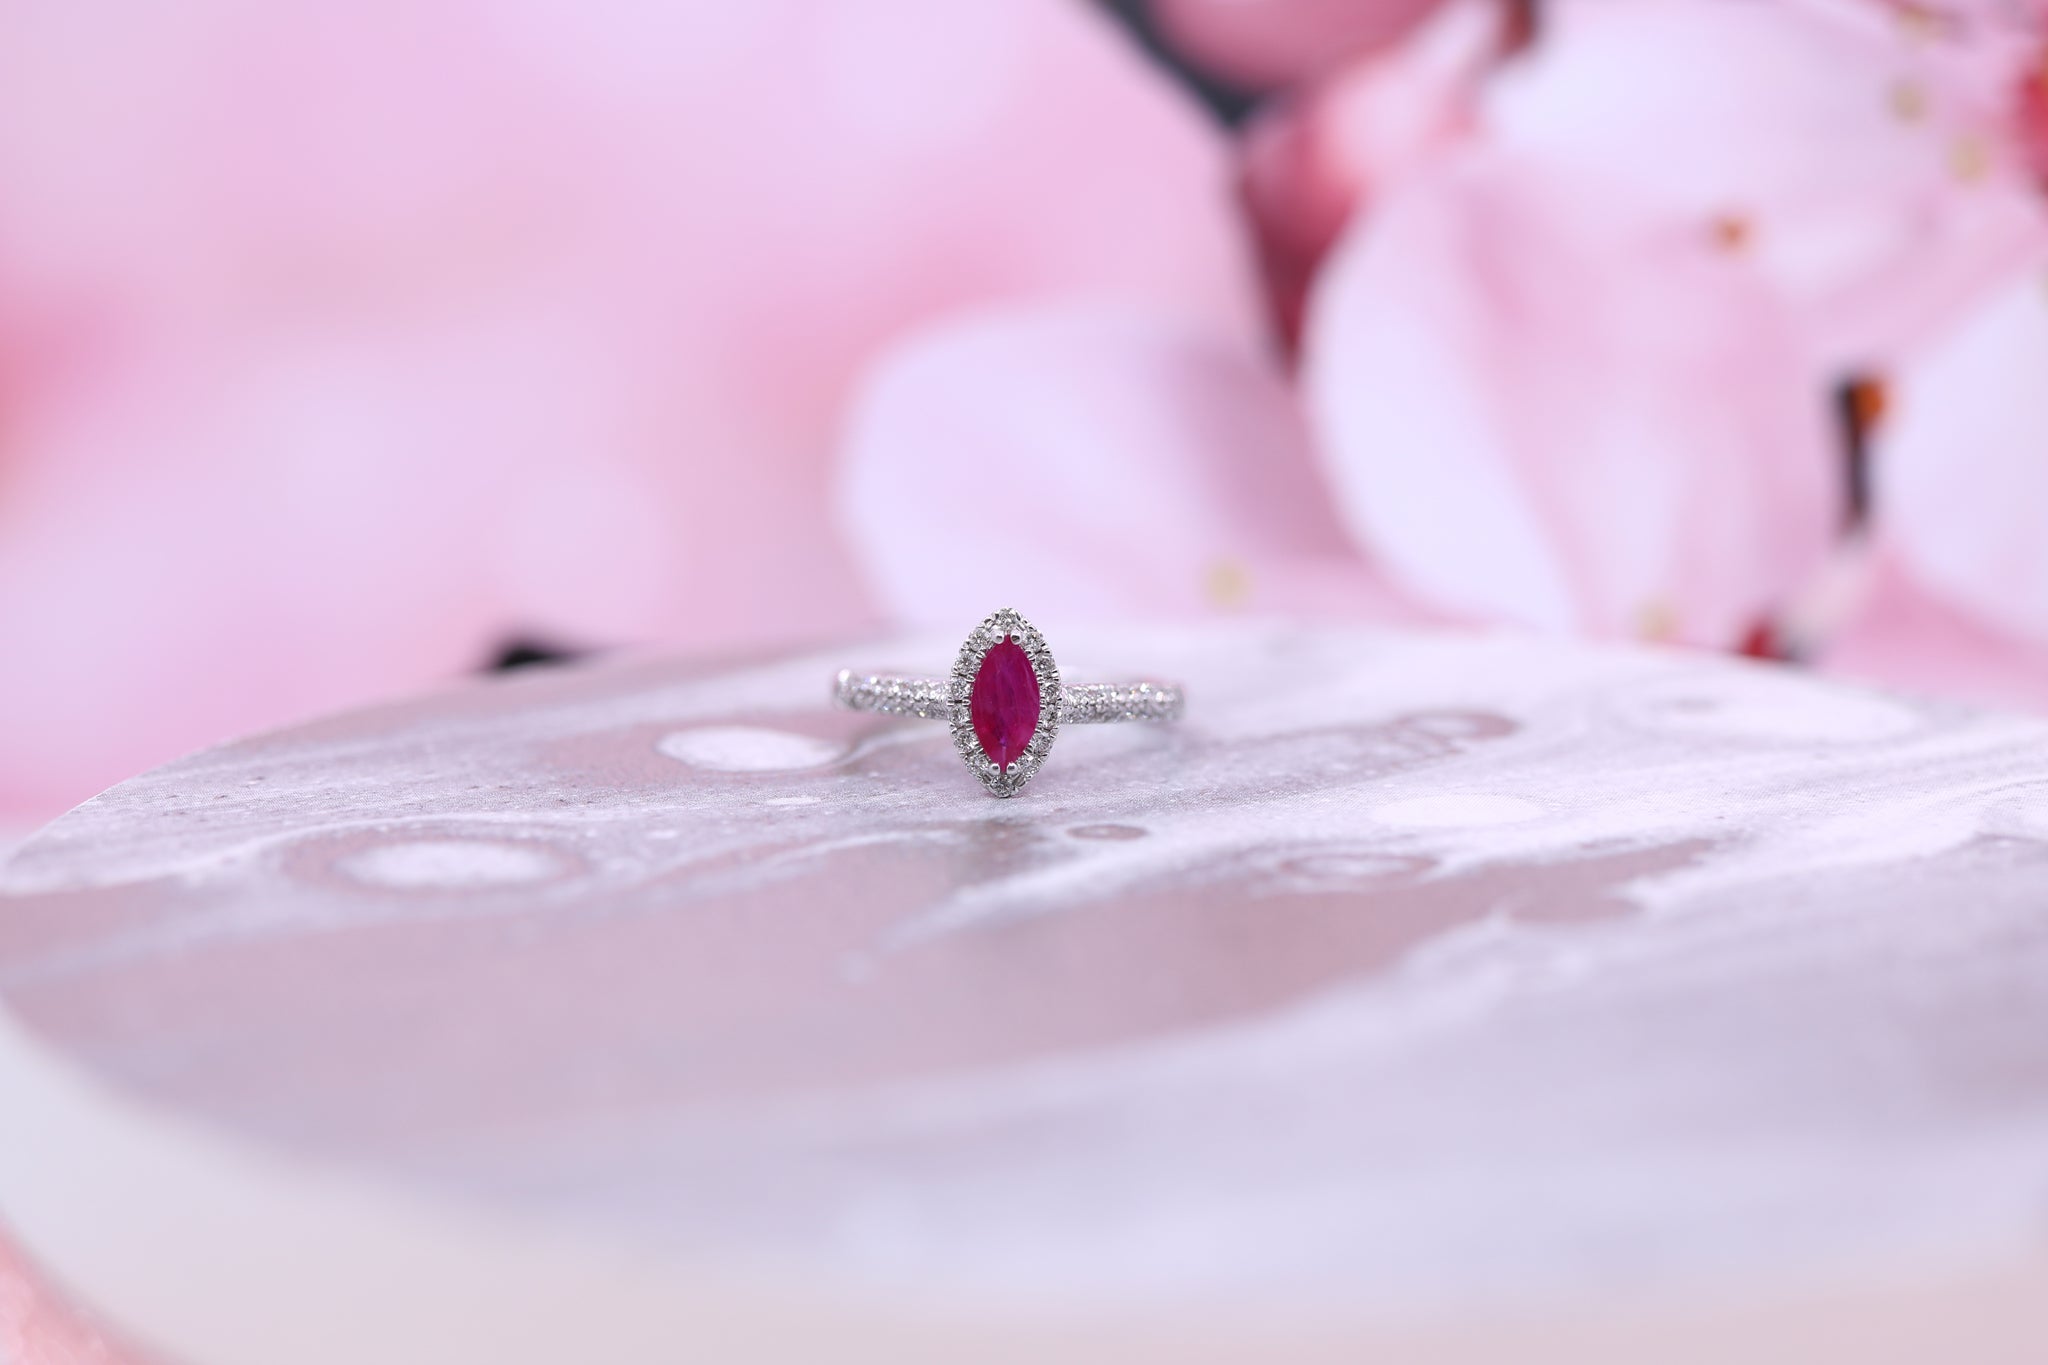 9ct White Gold Ruby & Diamond Ring 0.33ct - AM4019 - Hallmark Jewellers Formby & The Jewellers Bench Widnes